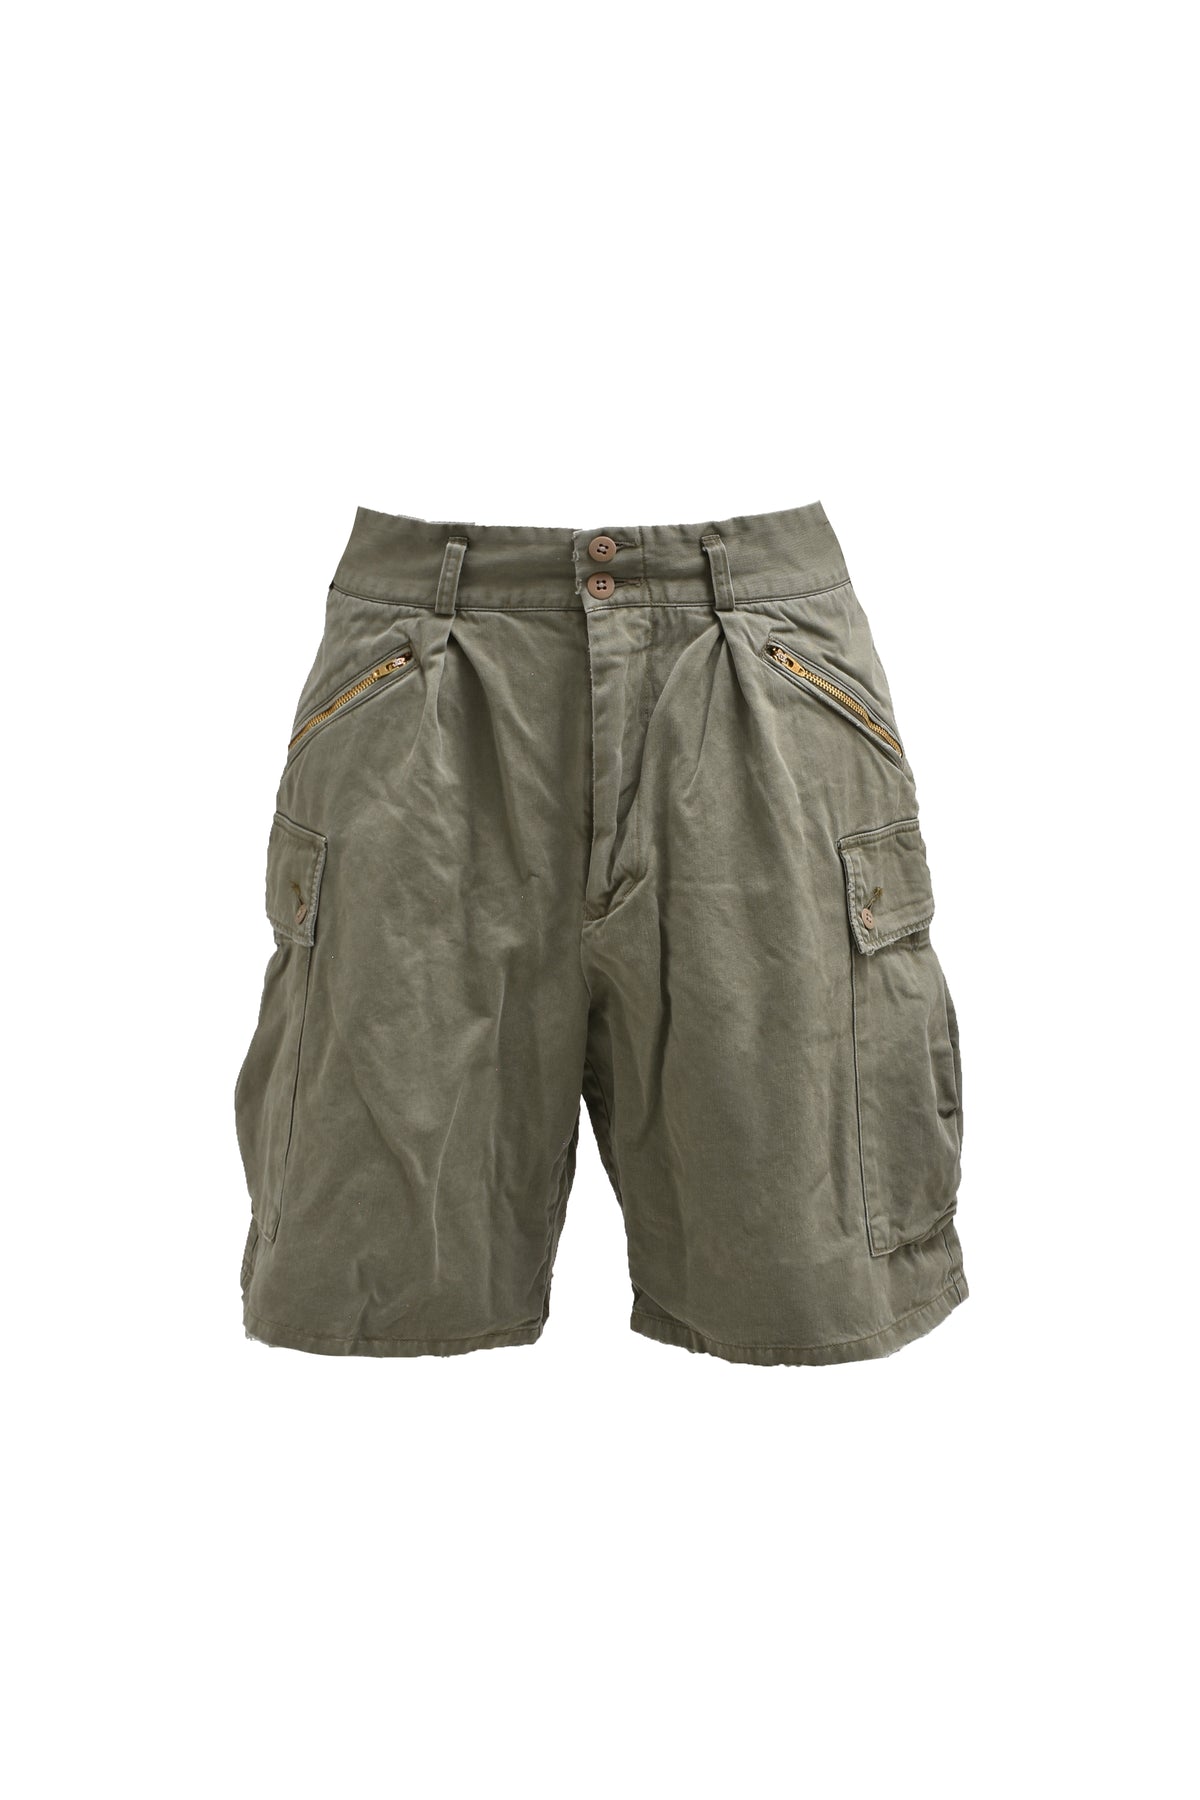 US ARMY MOUNTAIN TROOPER SHORTS / OD AGEING